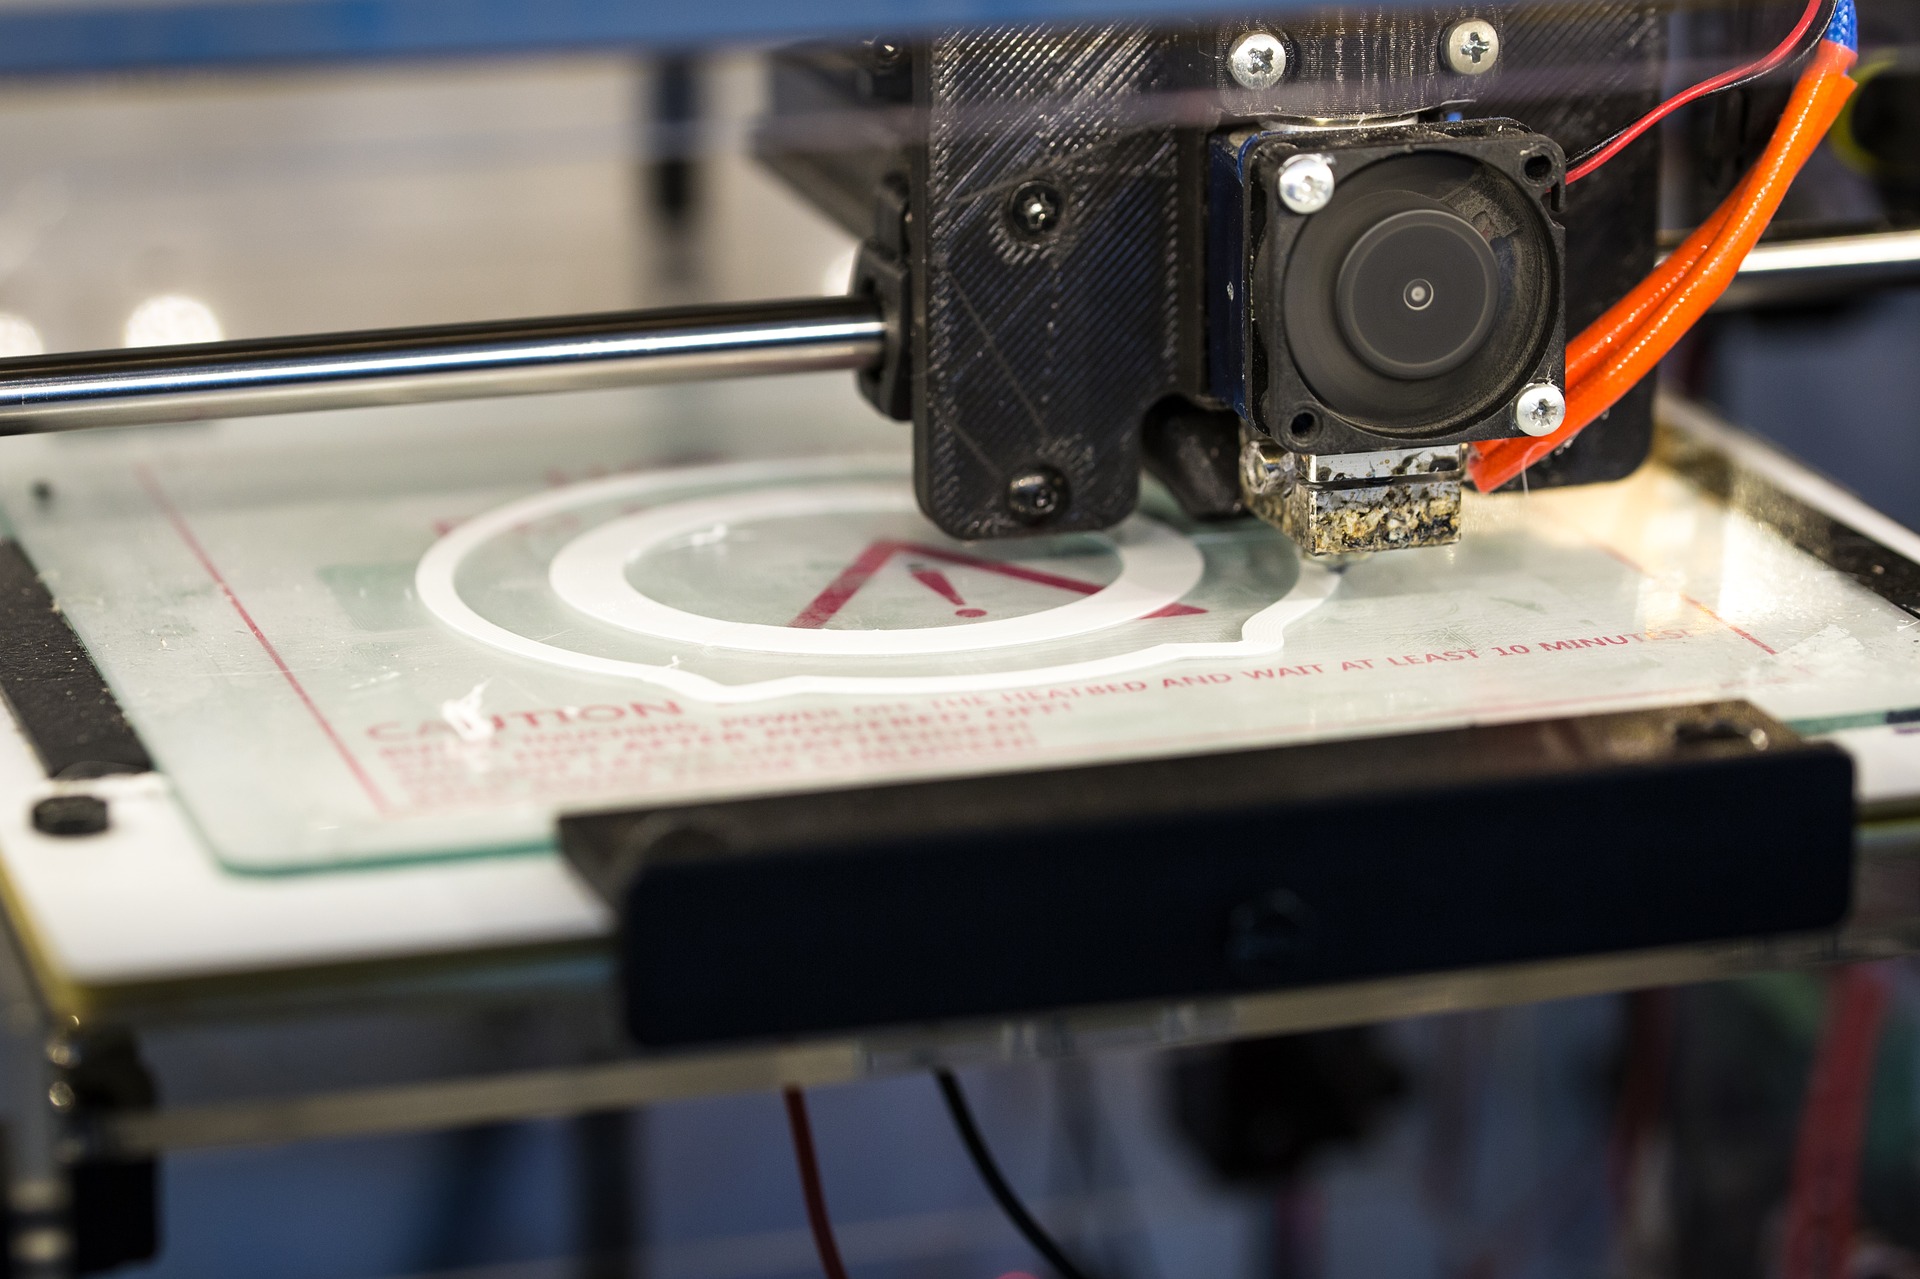 Why Are 3D Printers Such A Big Deal?